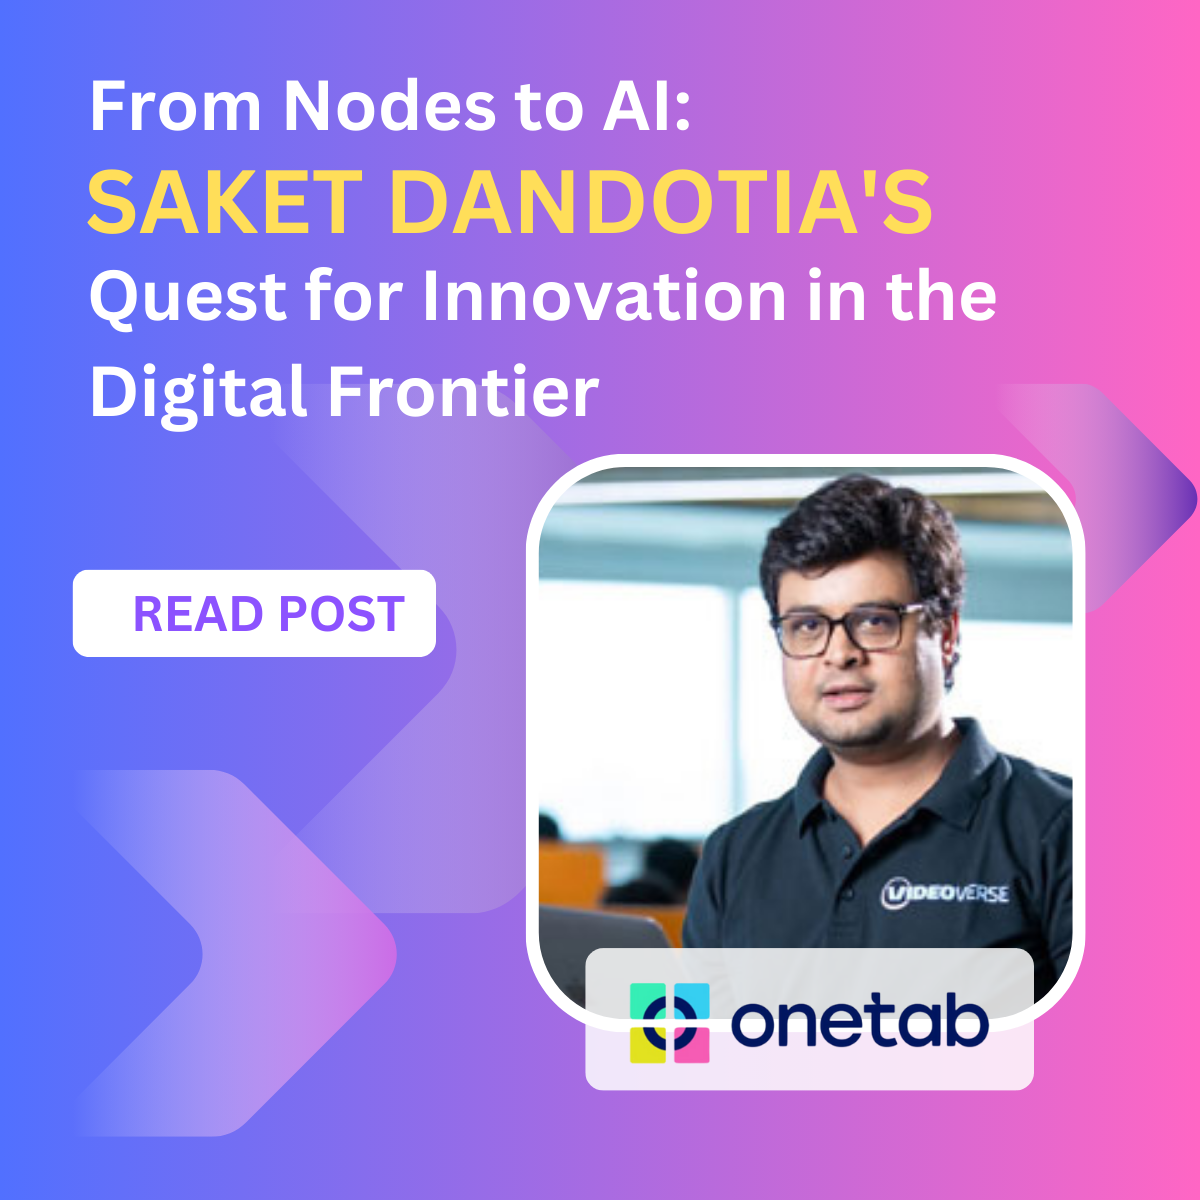 From Nodes to AI: Saket Dandotia's Quest for Innovation in the Digital Frontier